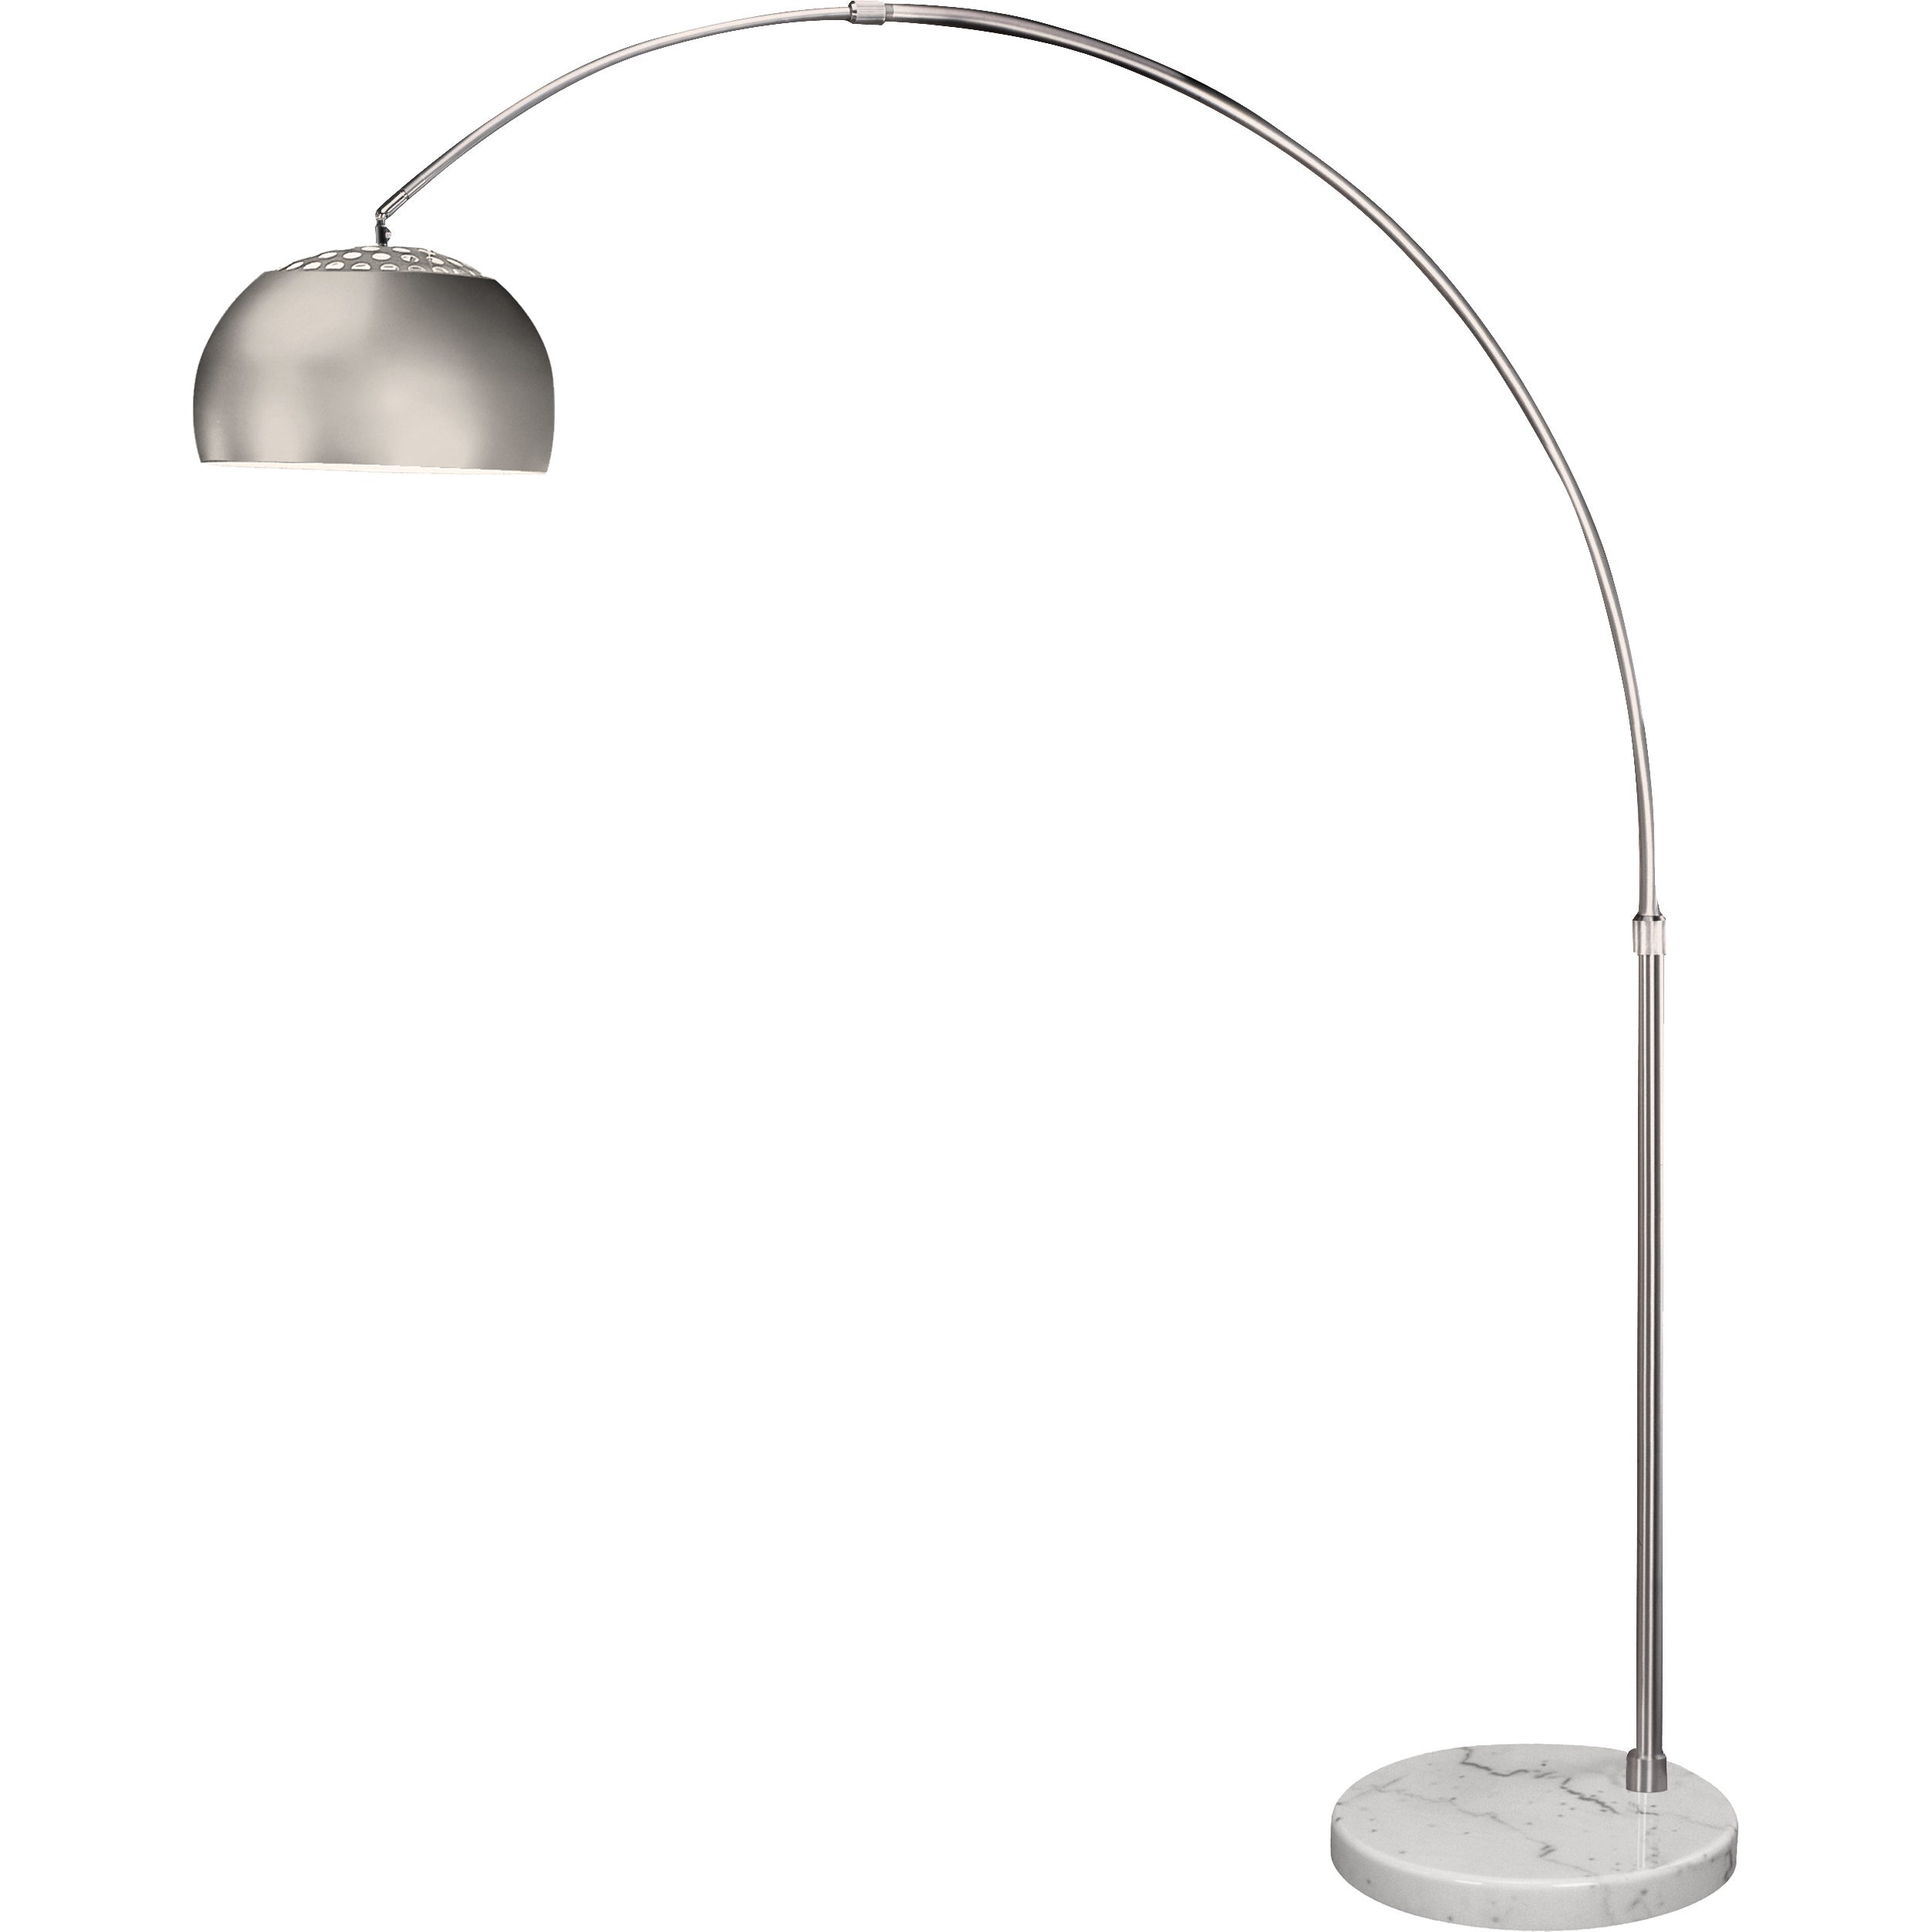 Mid 1 Light Brushed Nickel Arc Floor Lamp within size 2503 X 2503